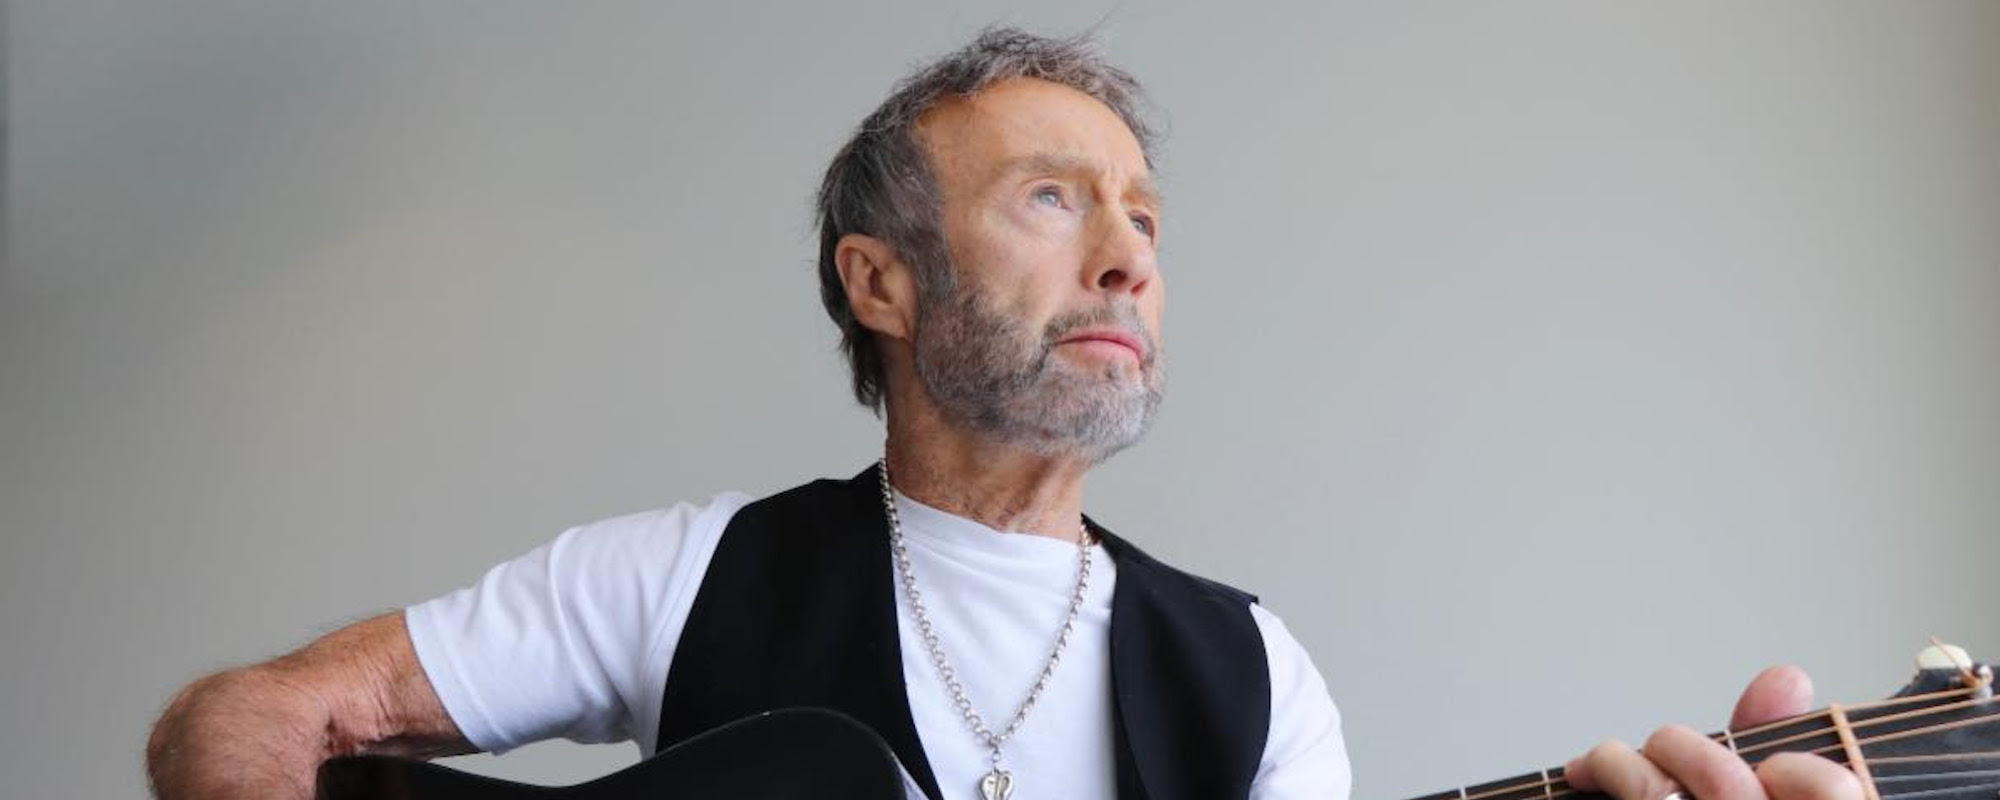 Paul Rodgers Admits He Turned Down an Offer to Be Inducted into the Rock & Roll Hall of Fame